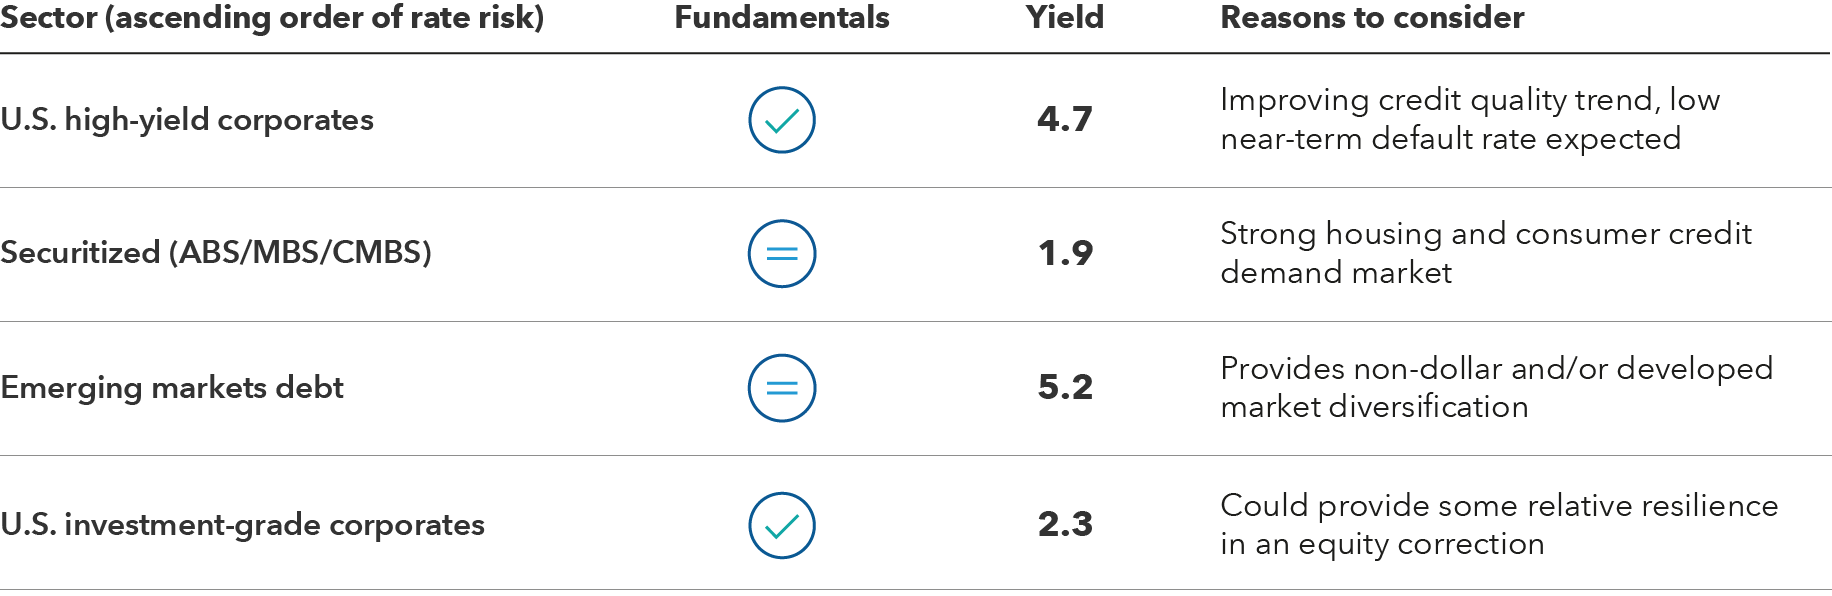 A table showing various sectors of the fixed income market, the fundamentals driving each sector, the current yield of the sector (represented by yield to worst as of November 30, 2021), and reasons investors should consider each sector. Consider U.S. high-yield corporates, yielding 4.7%, because of improving credit quality and low expected near-term defaults. Consider securitized assets (e.g., ABS, MBS, CMBS), yielding 1.9%, because of strong housing and consumer credit demand. Consider emerging markets debt, yielding 5.2%, because it provides non-dollar and/or developed market diversification. Consider U.S. investment-grade corporate debt, yielding 2.3%, because it may provide some relative resilience in an equity correction. 